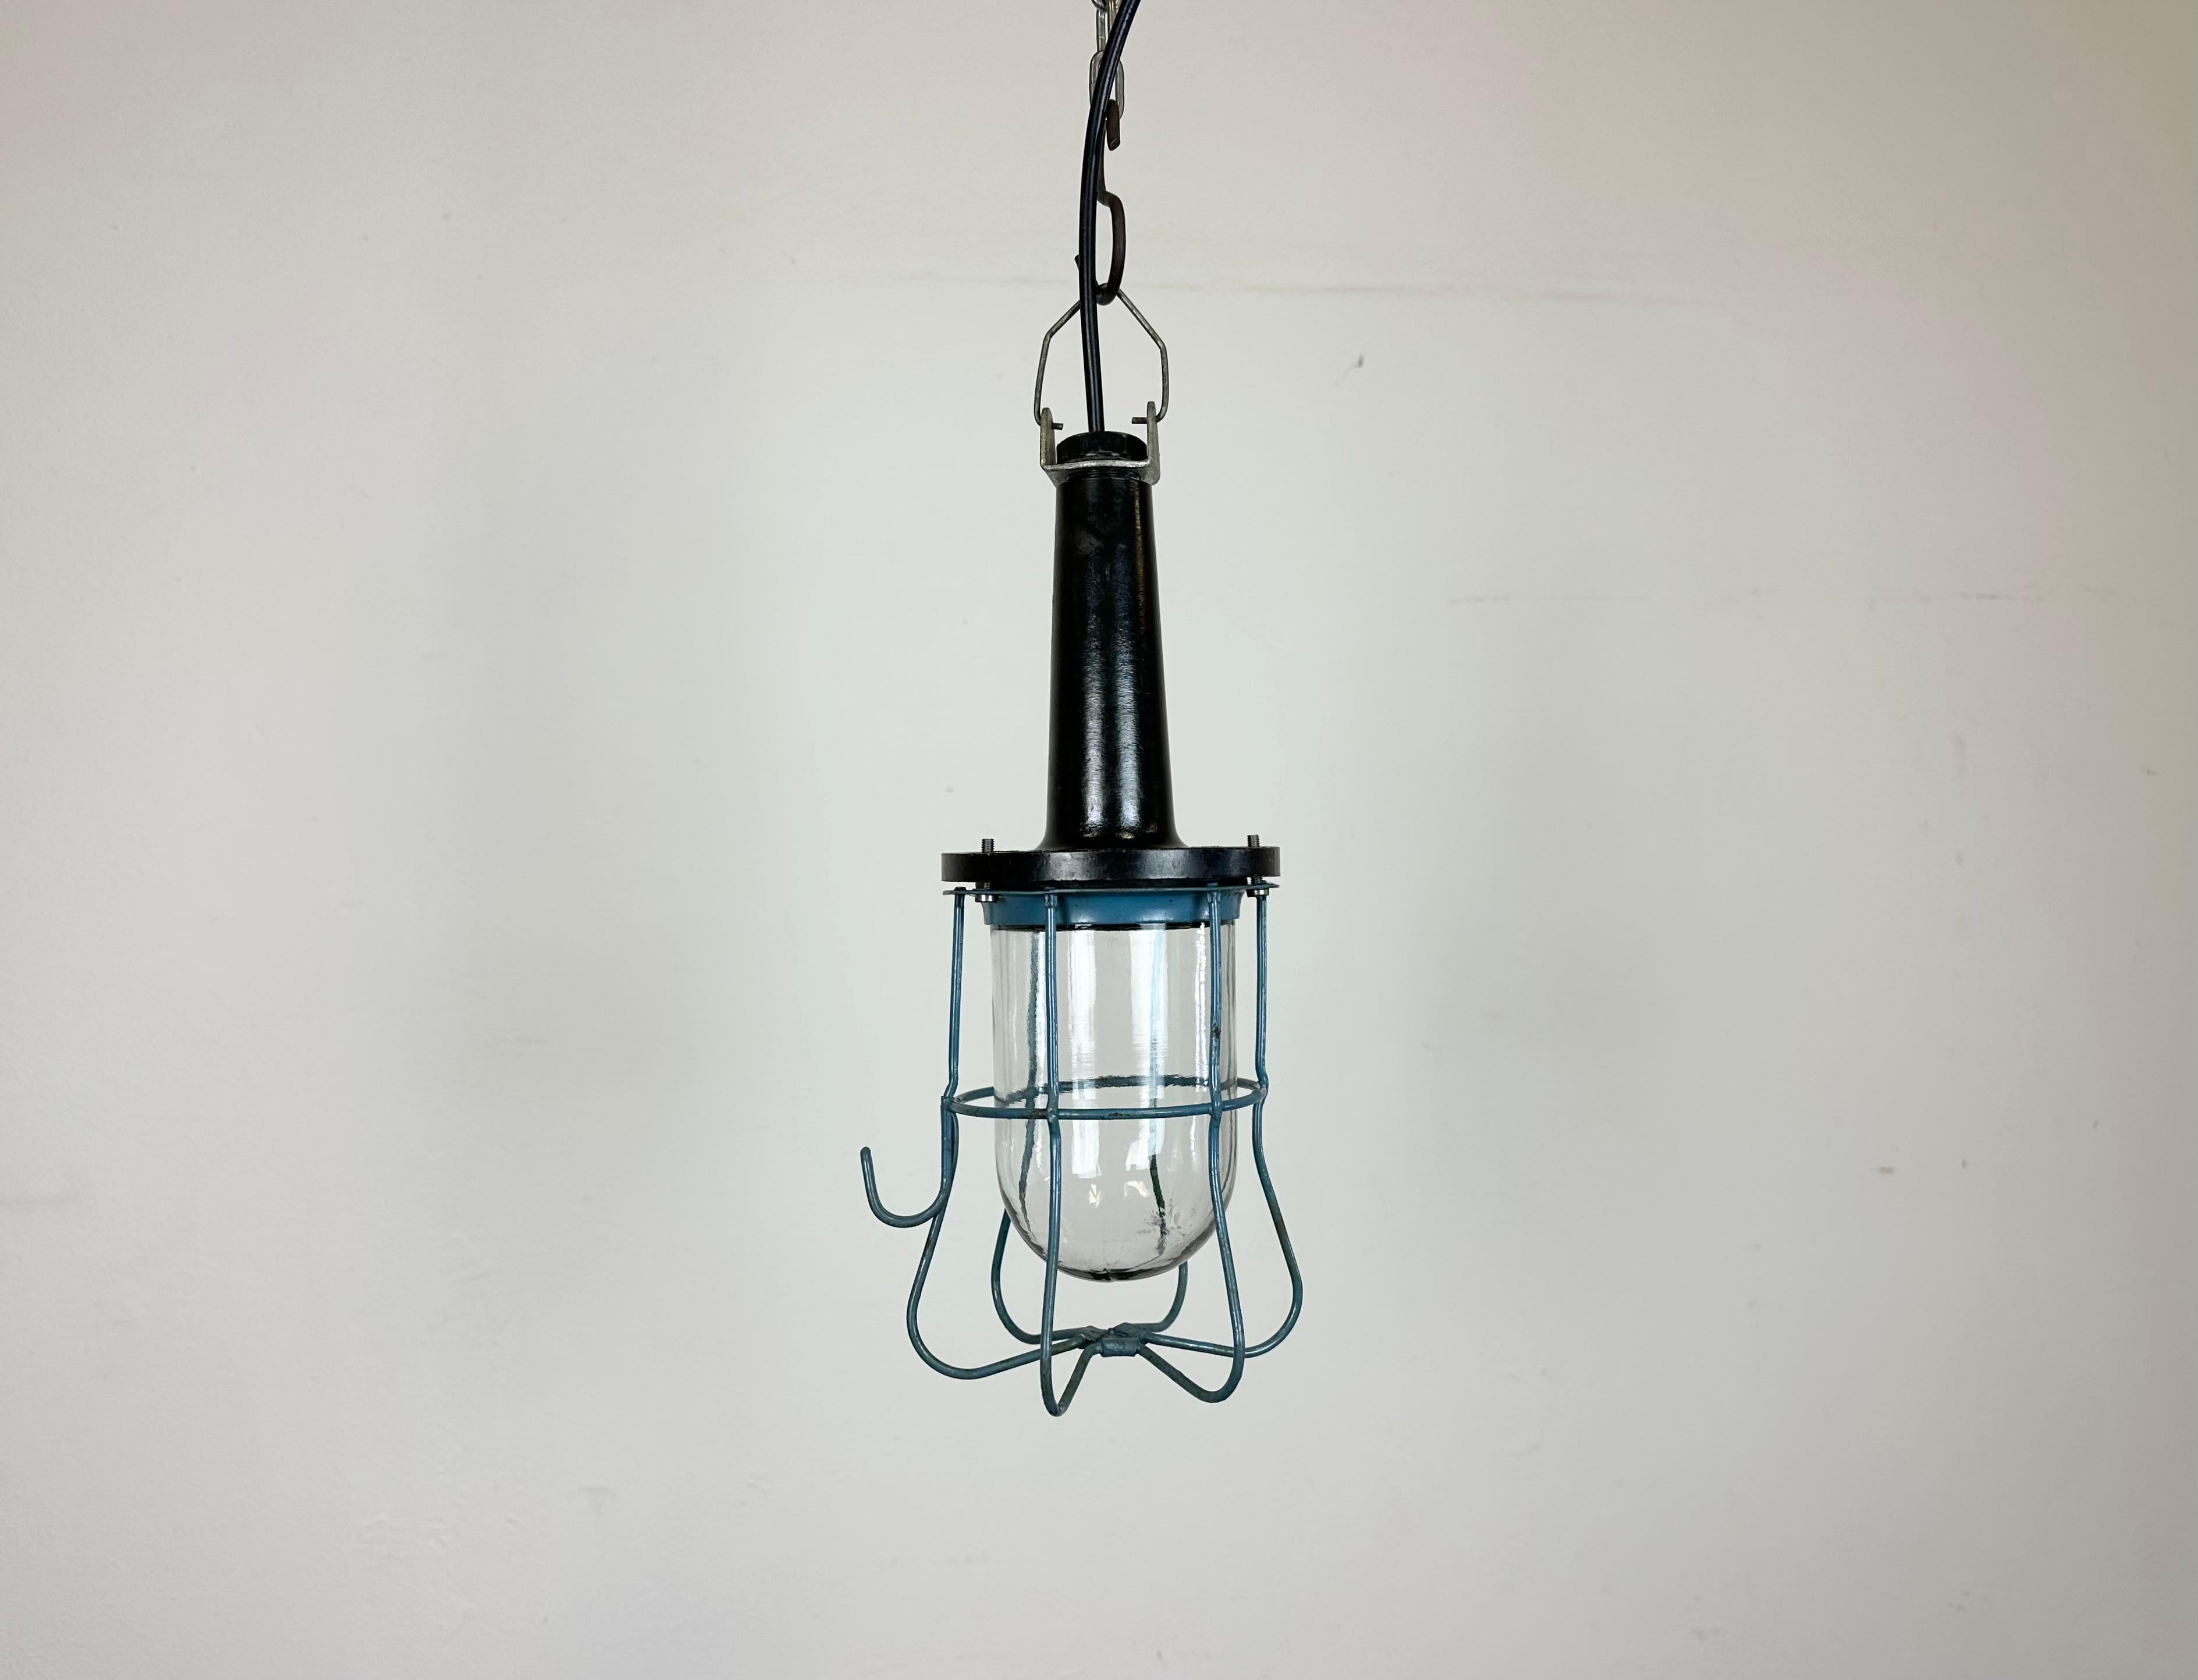 Industrial walkabout work lamp made in Poland during the 1960s These lamps were used in factories, workshops and army as a portable light source . It features a bakelite handle, a blue iron grid and clear glass cover.
The socket requires E27 light